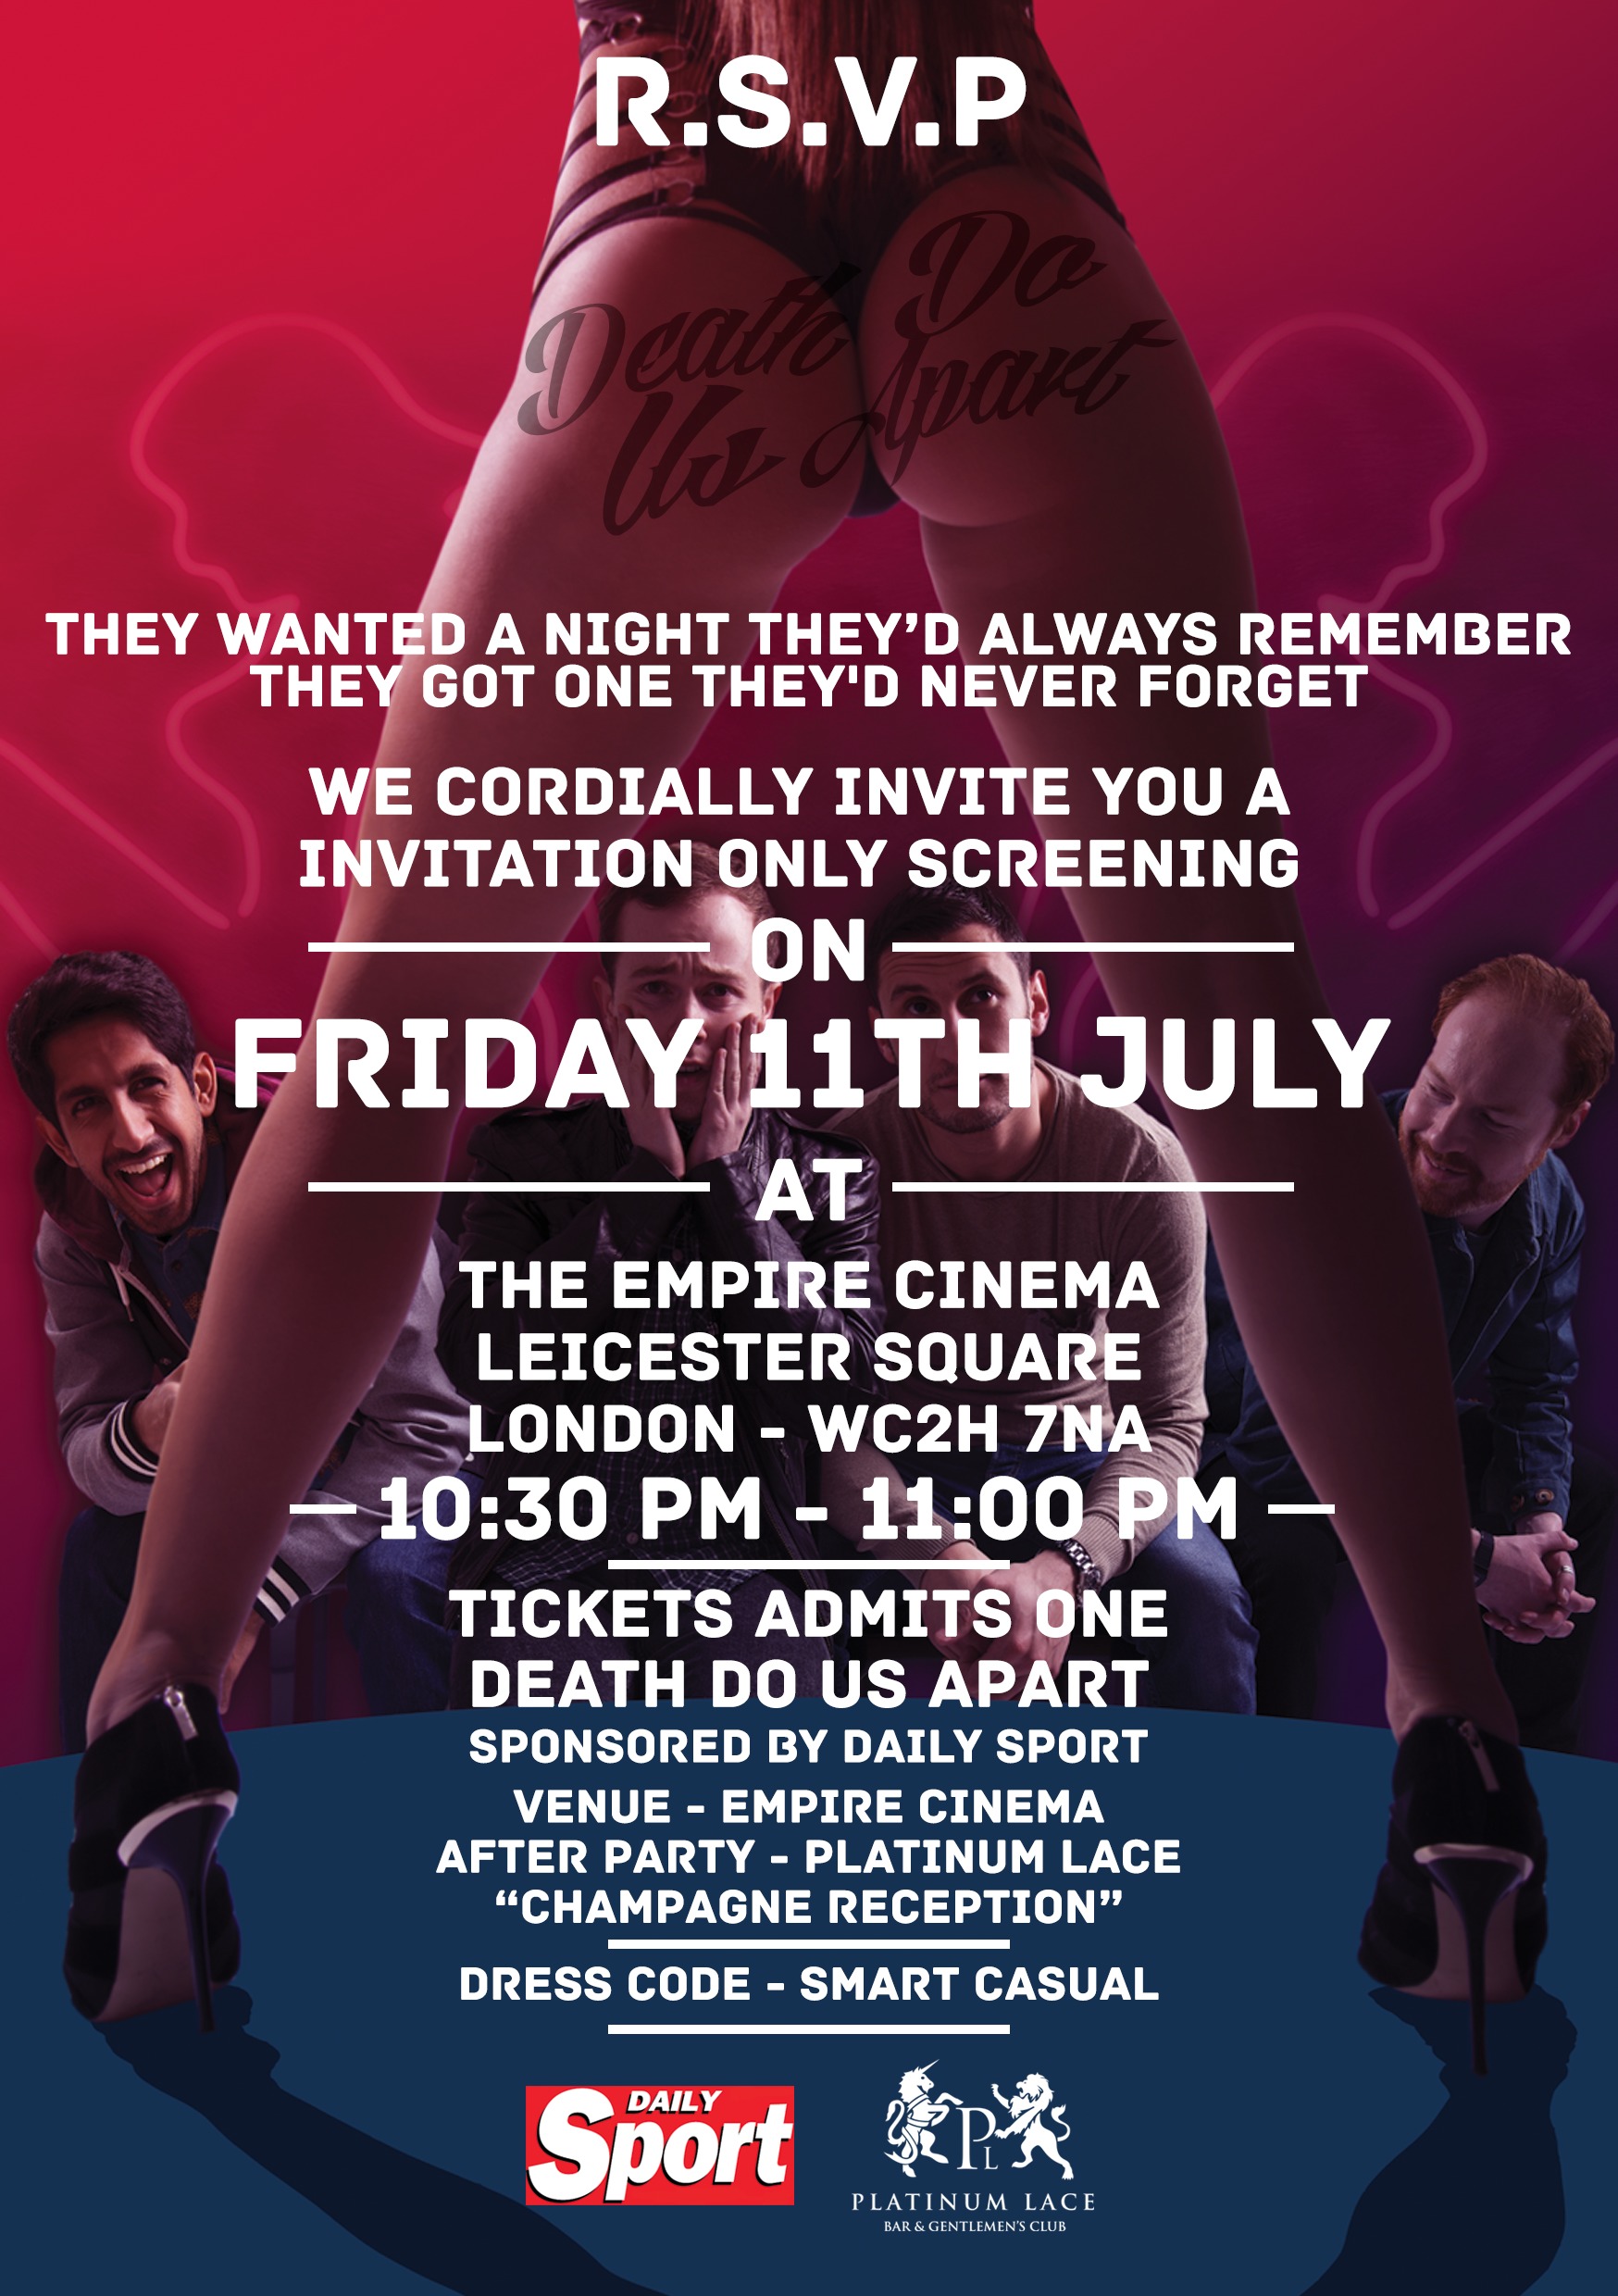 Doing the screening has been so rewarding can't wait to do actually have a premier! By the way the E - Invites for the screening is it not eye grabbing? The after party was Sponsored by The Daily Sport and Platinum Lace London.